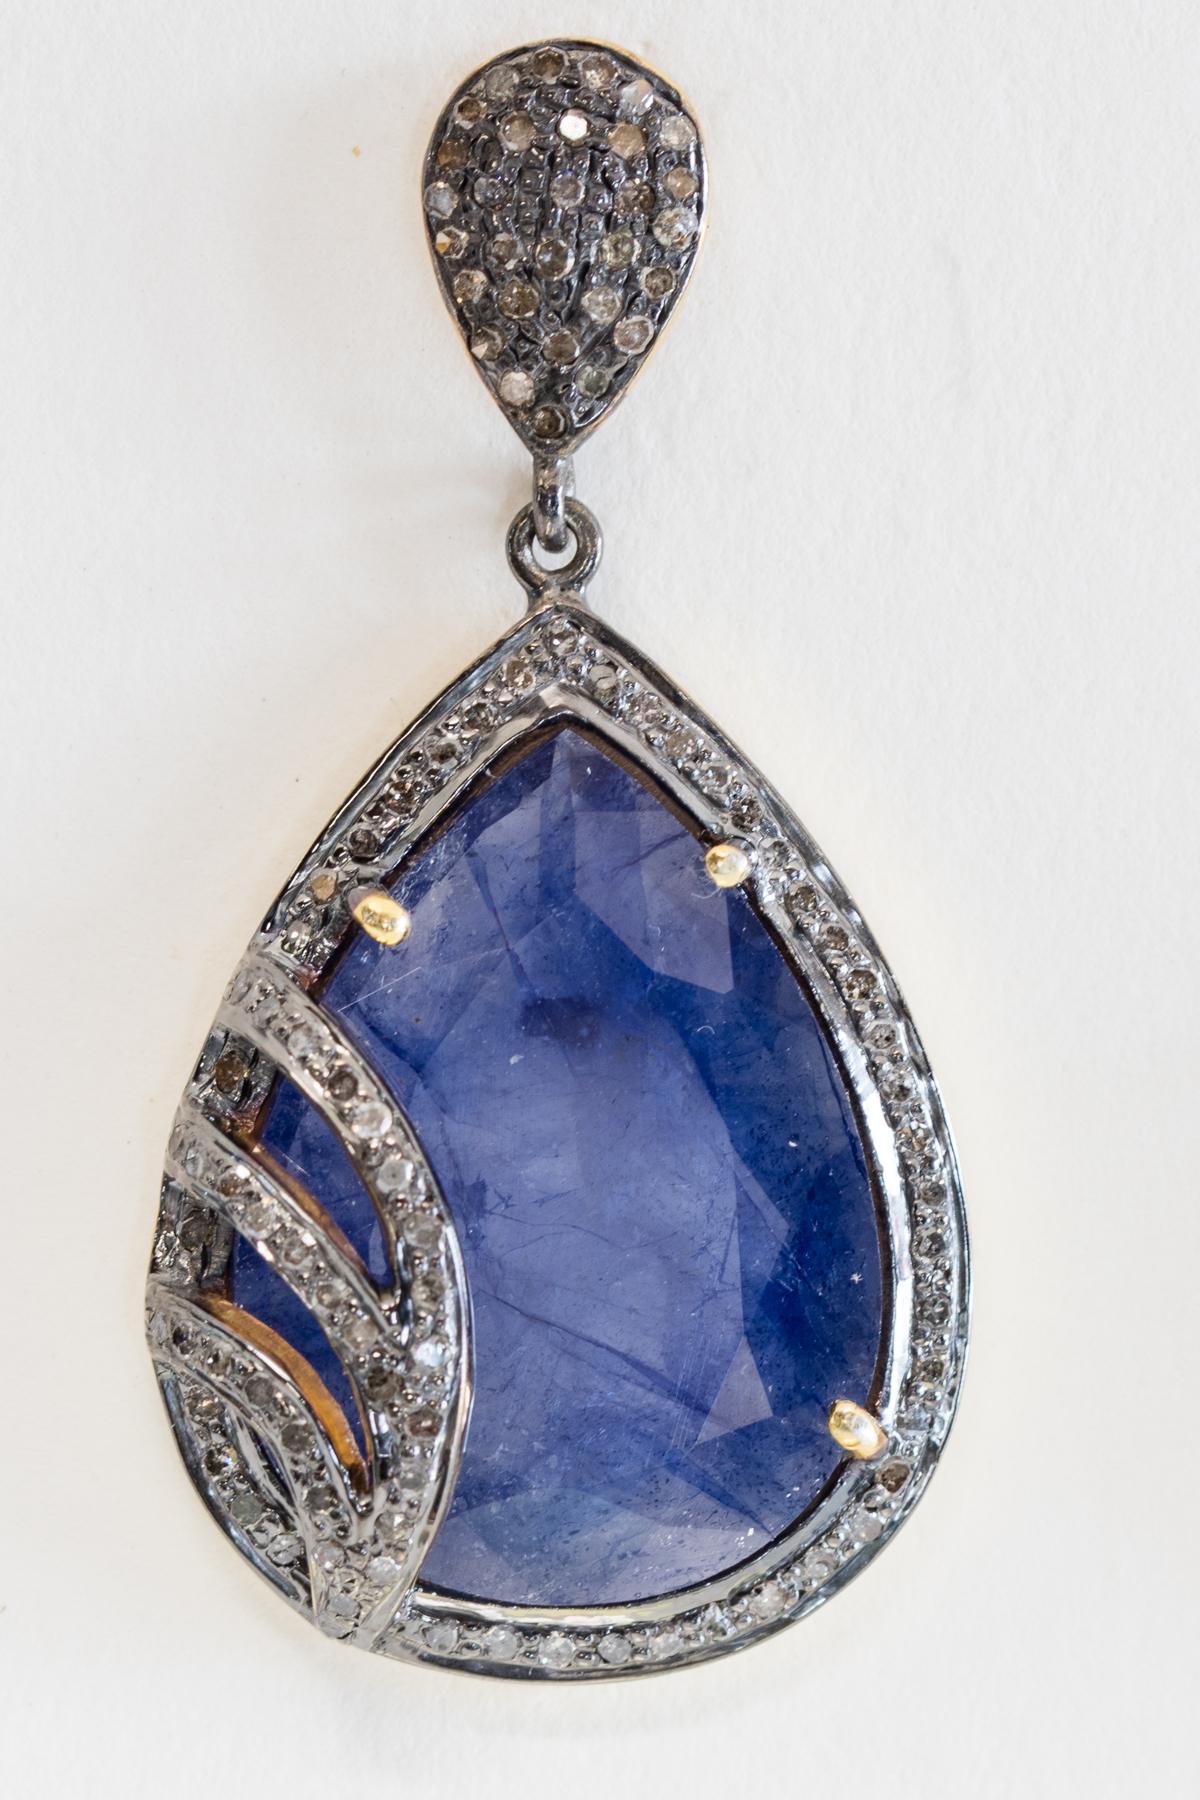 Pear-shaped, rosecut rock sapphires (as found in their natural state complete with imperfections) with diamond overlay and bordered in diamonds as well.  Set in an oxidized sterling silver with 18K gold post, for pierced ears.   Carat weight of